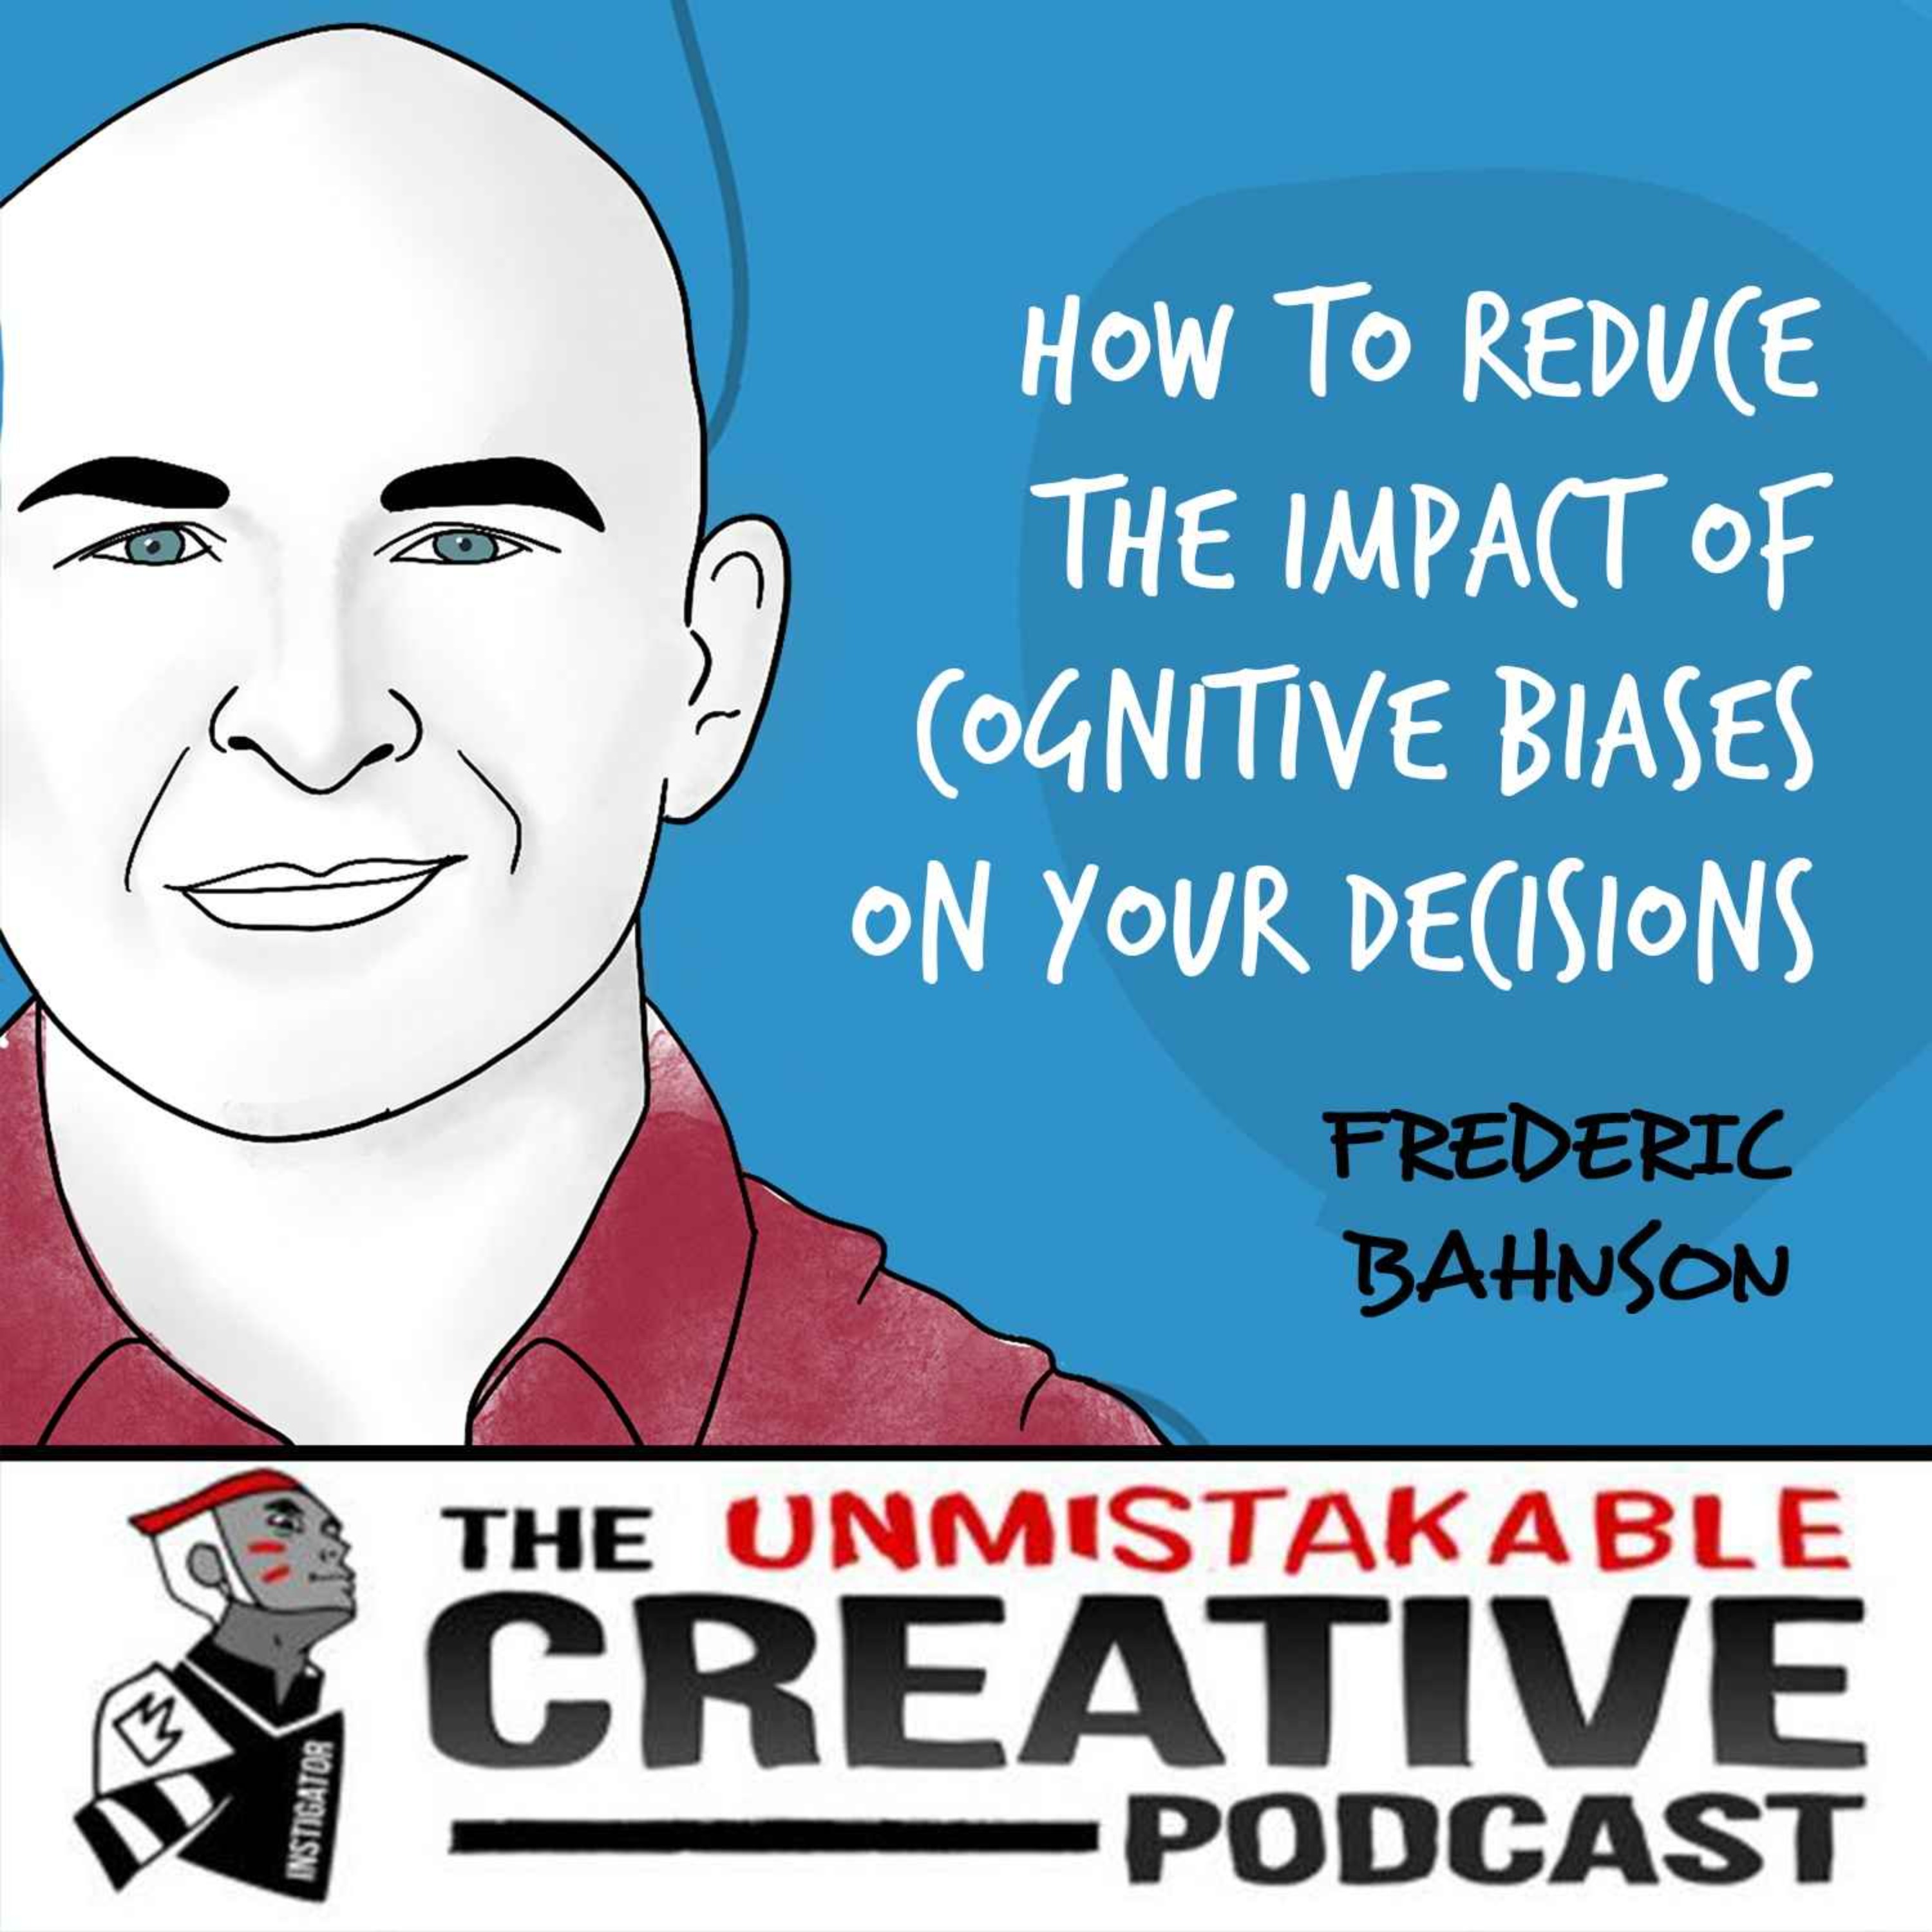 Frederic Bahnson | How To Reduce the Impact of Cognitive Biases on Your Decisions Image